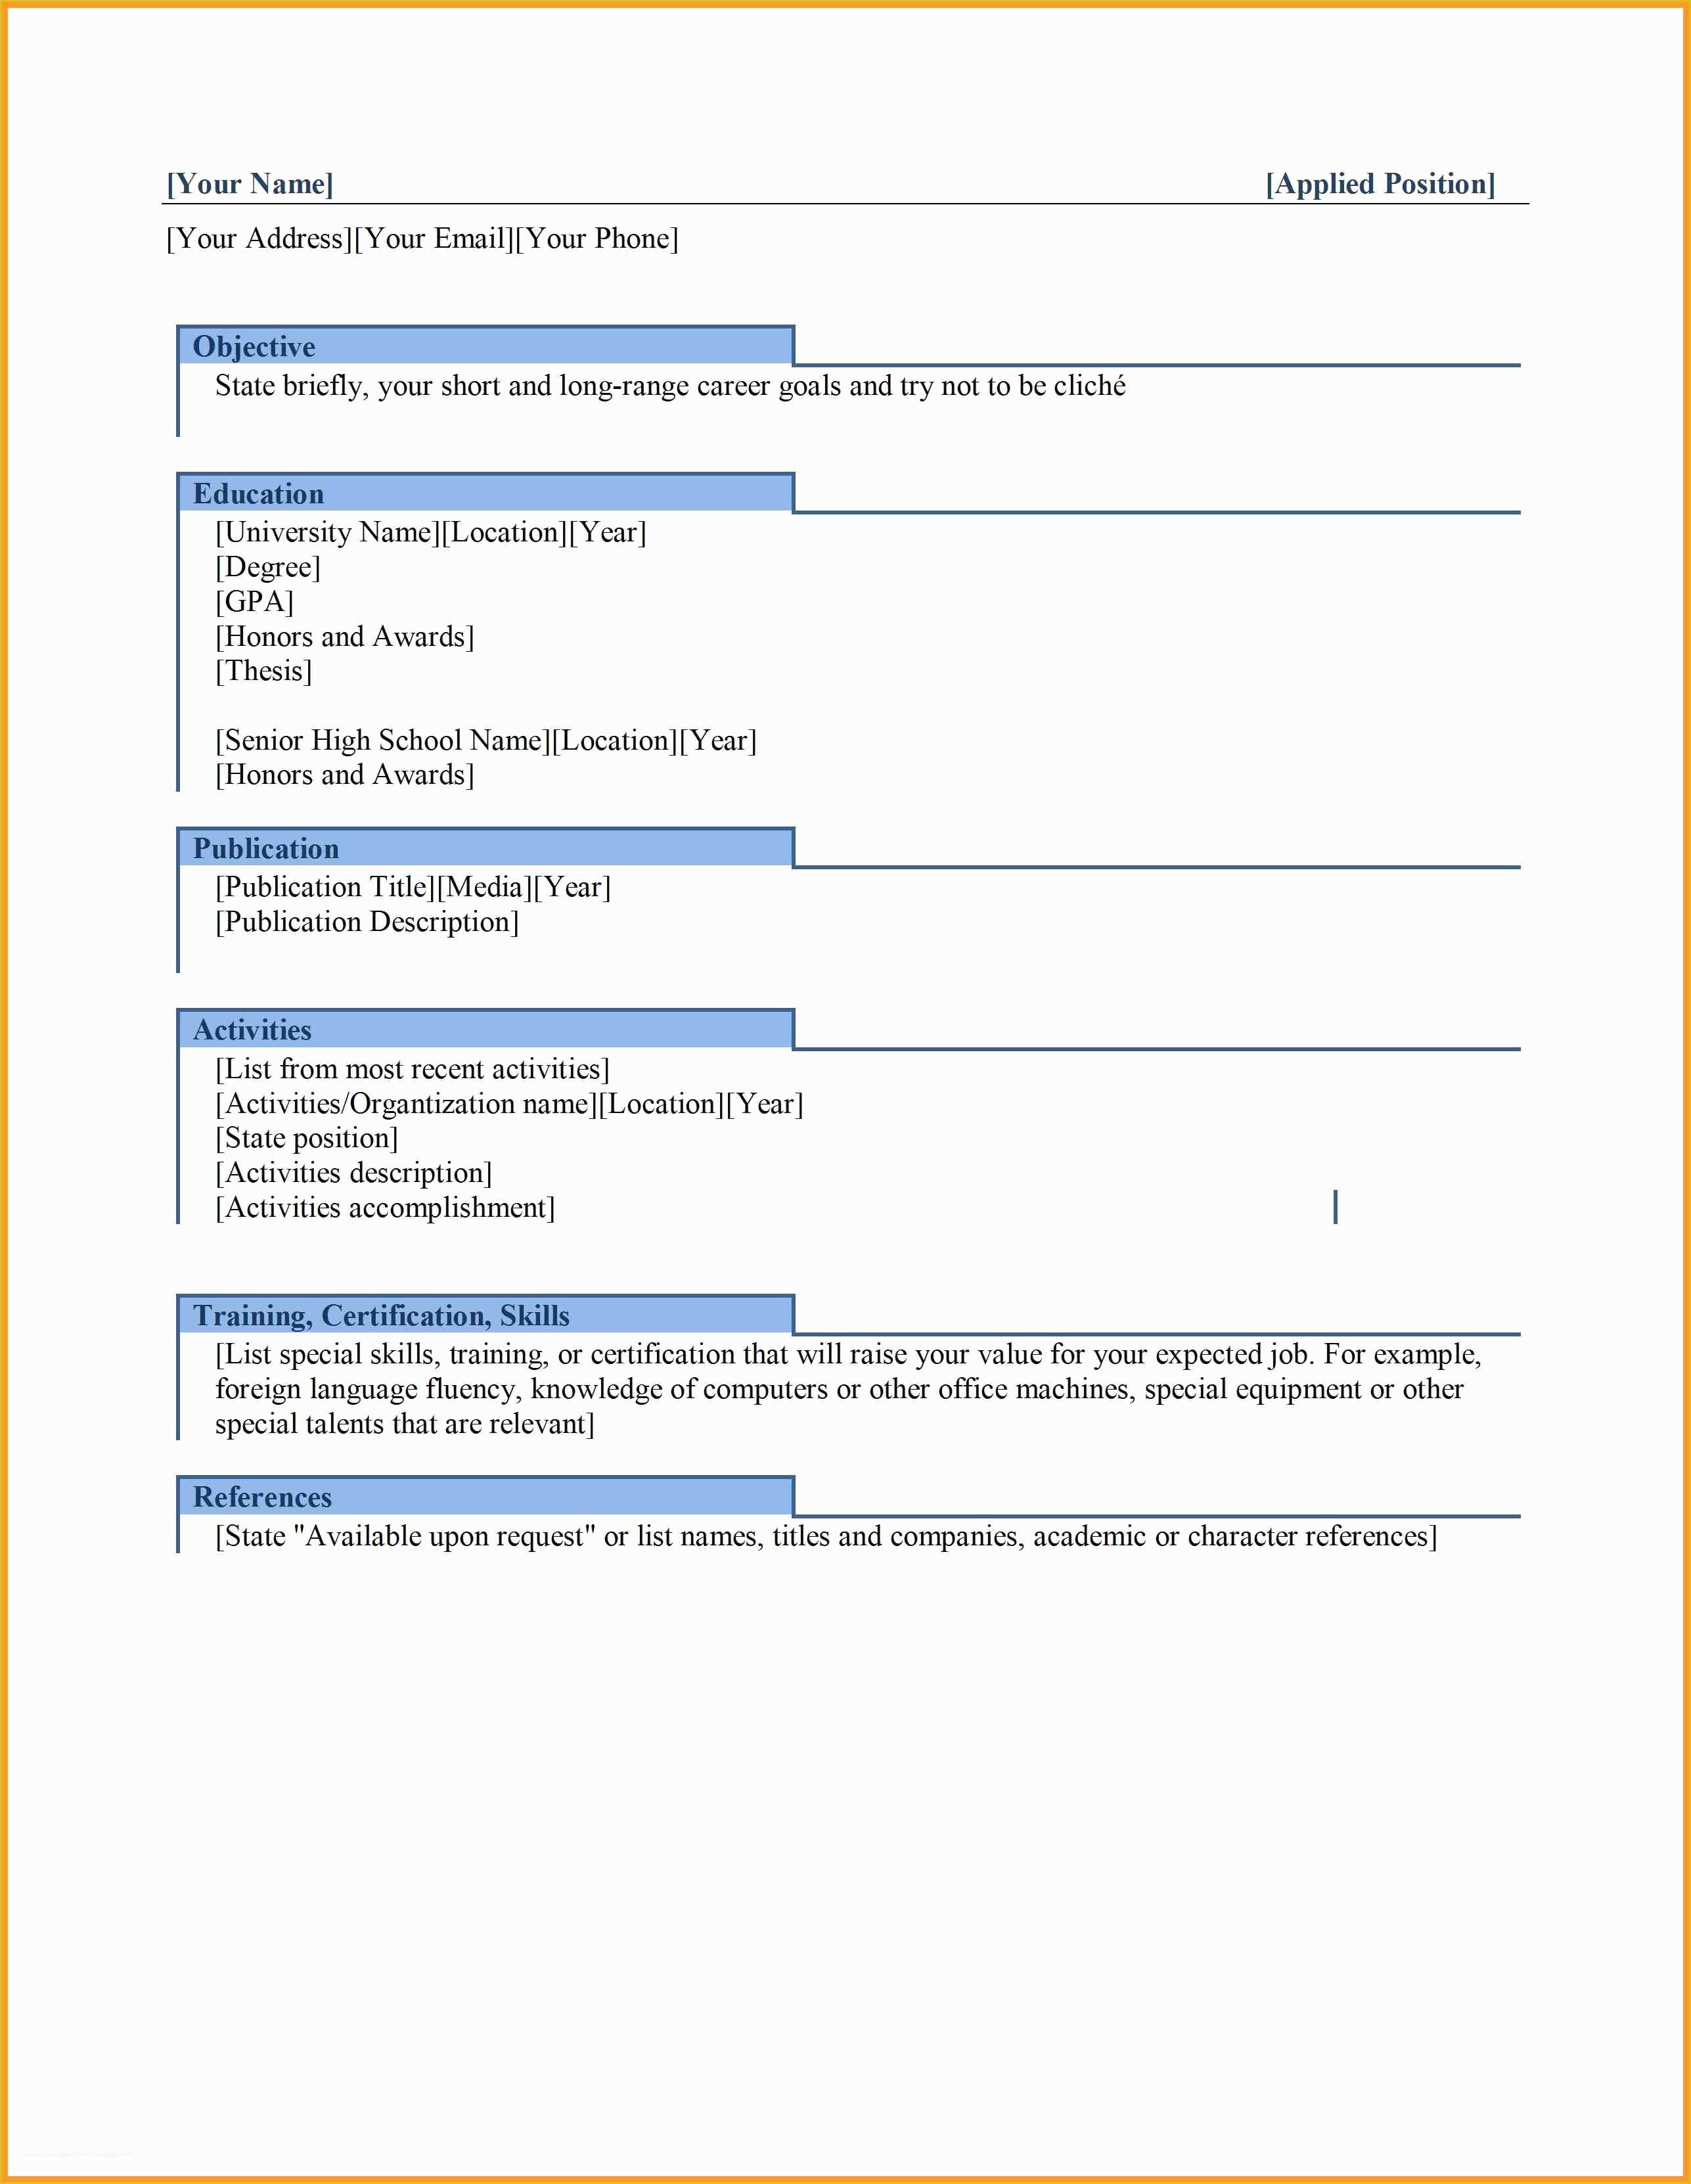 Microsoft Office Word Templates Free Download Of Microsoft Office Word Templates Free